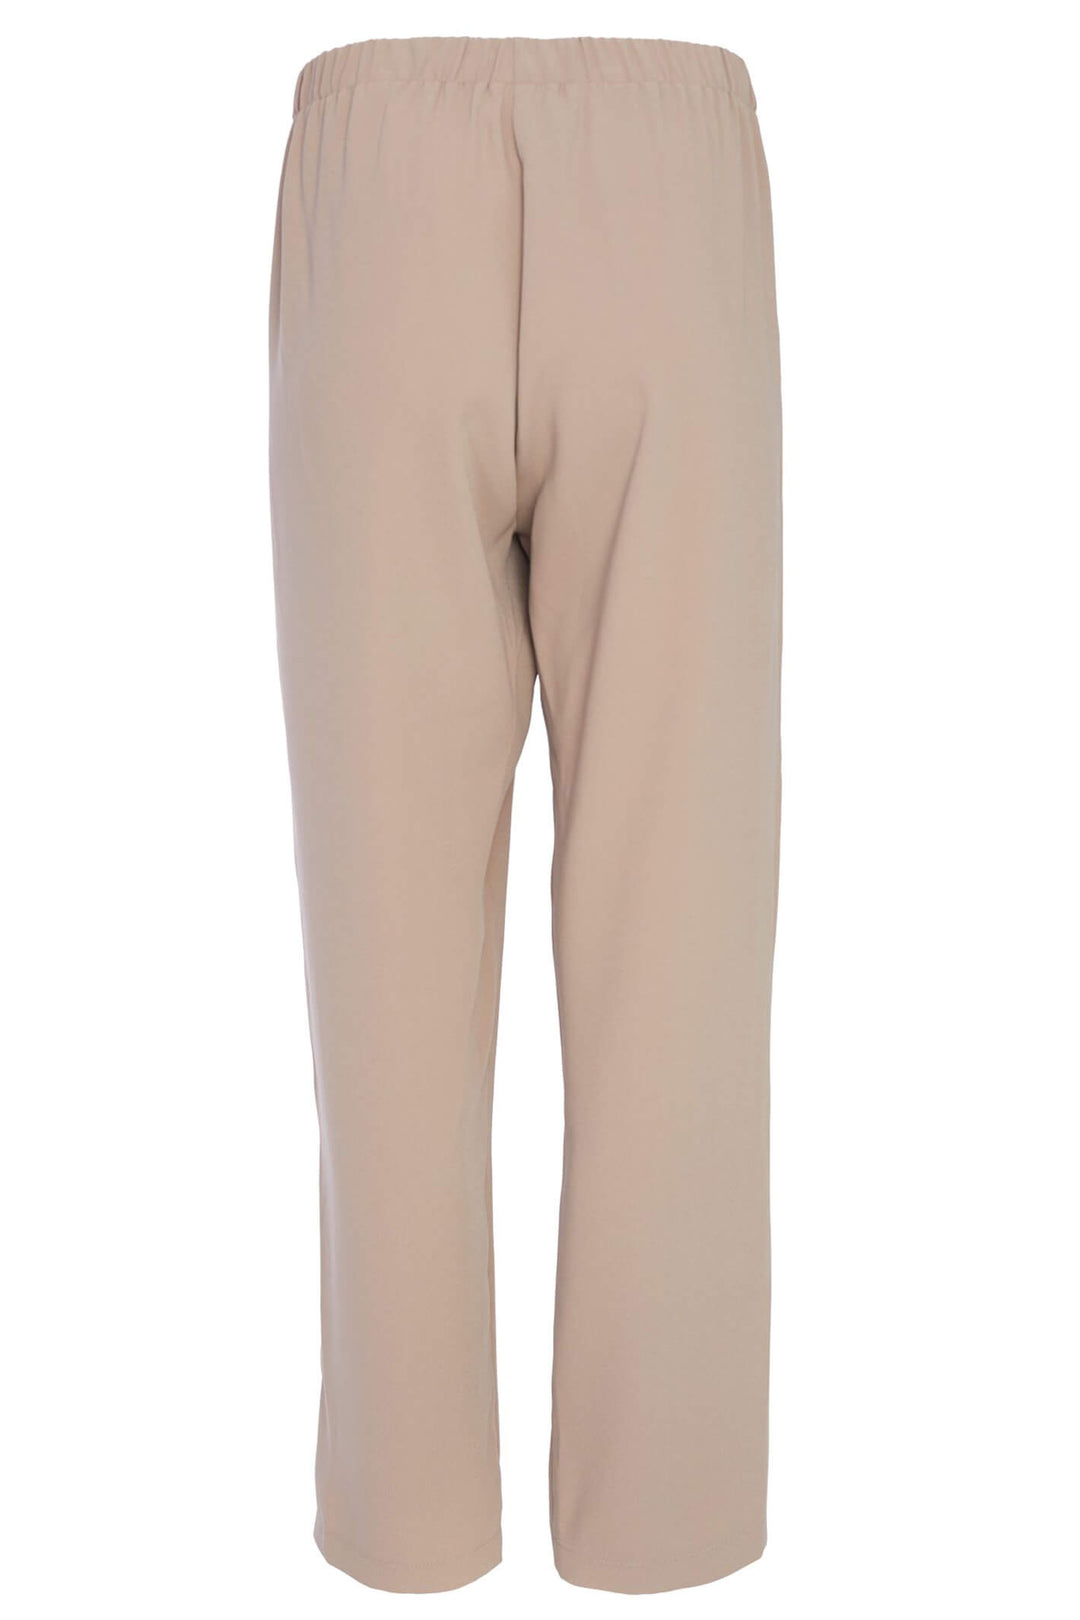 Ora ORS23 170 Taupe Wide Leg Trousers - Experience Boutique